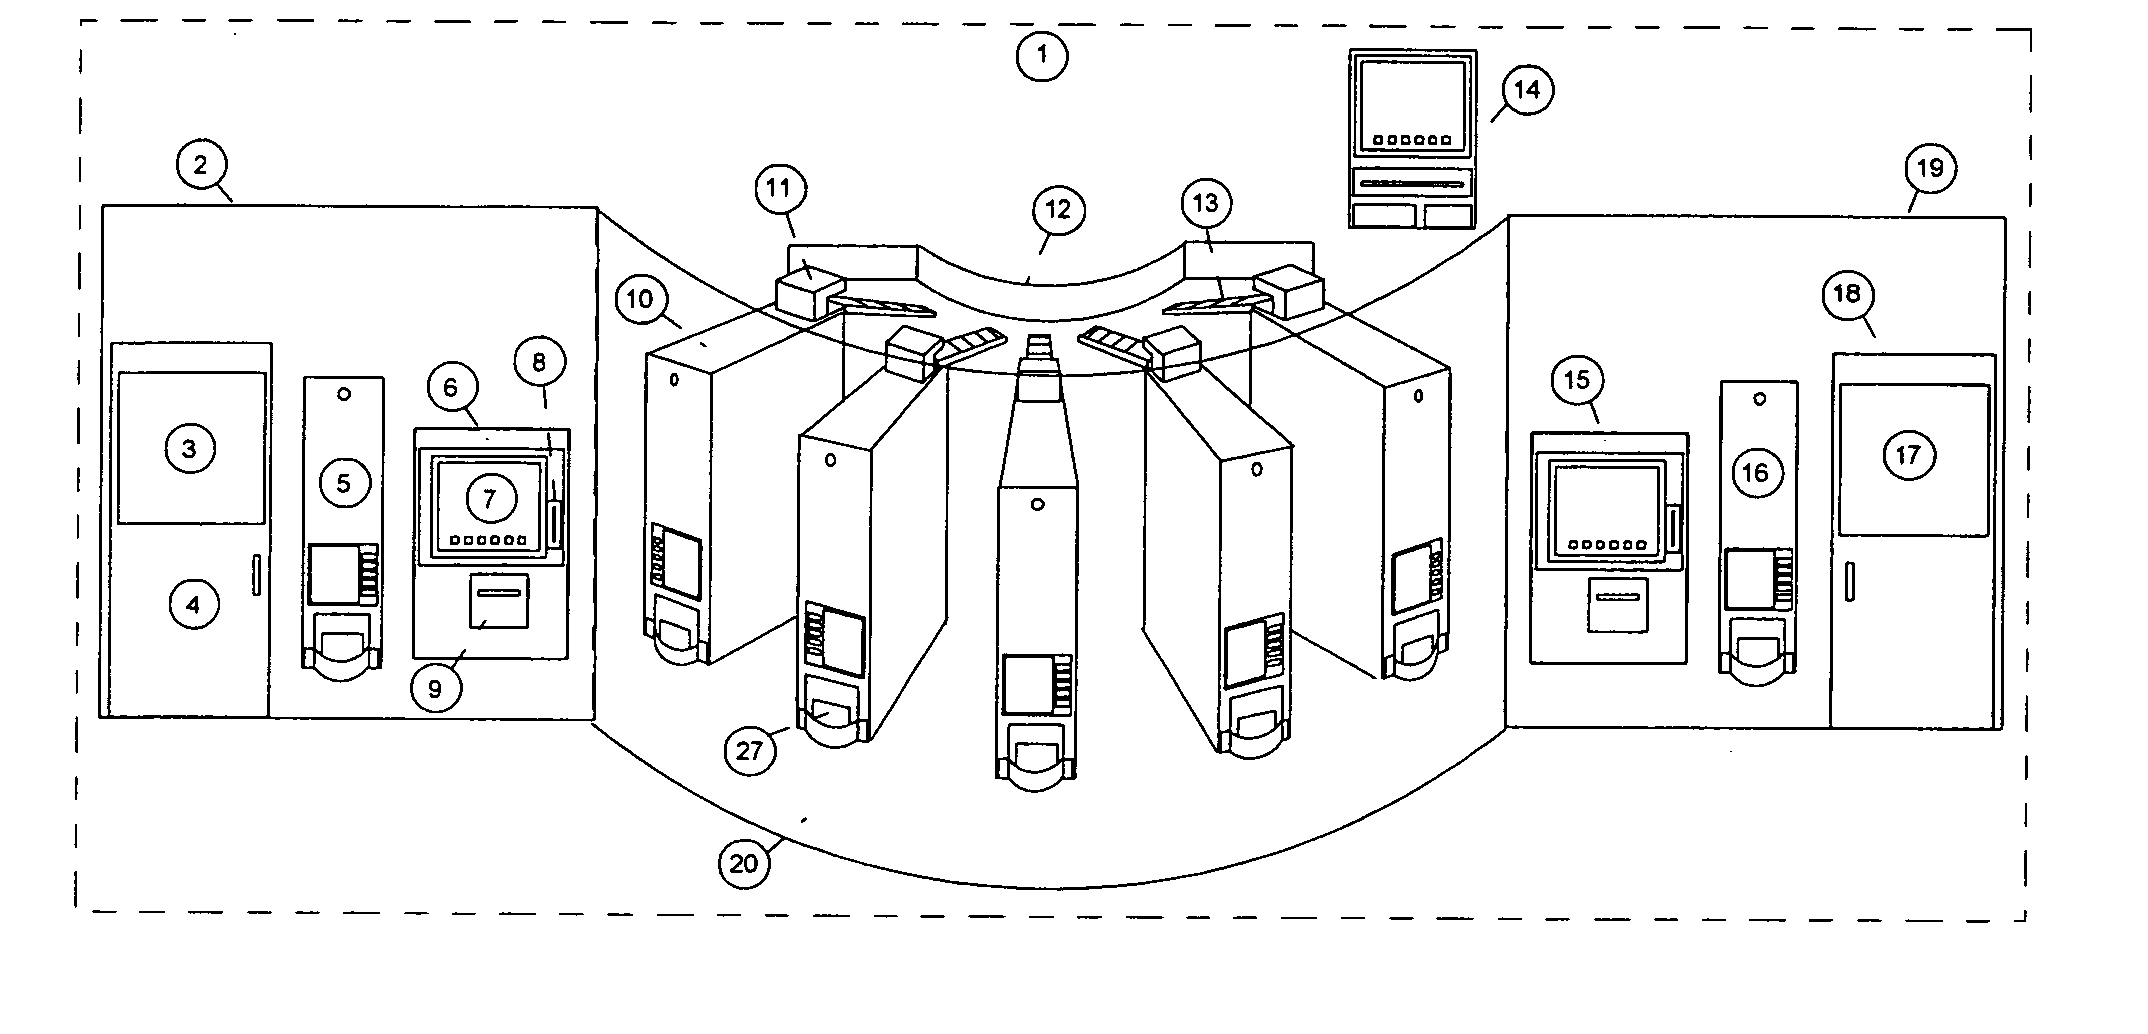 Automatic distributed vending system